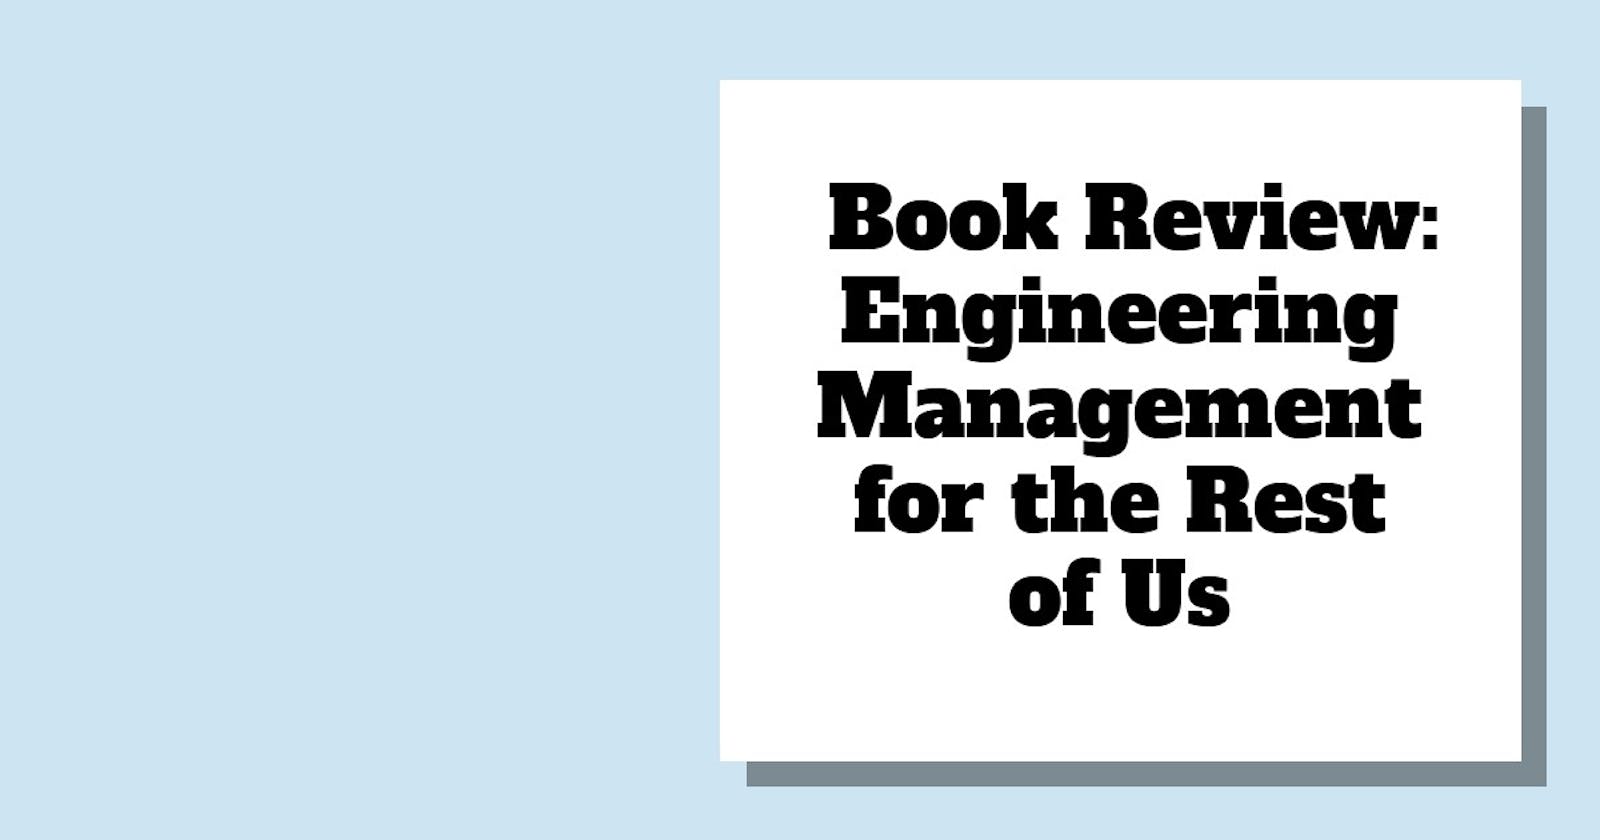 Book Review: Engineering Management for the Rest of Us